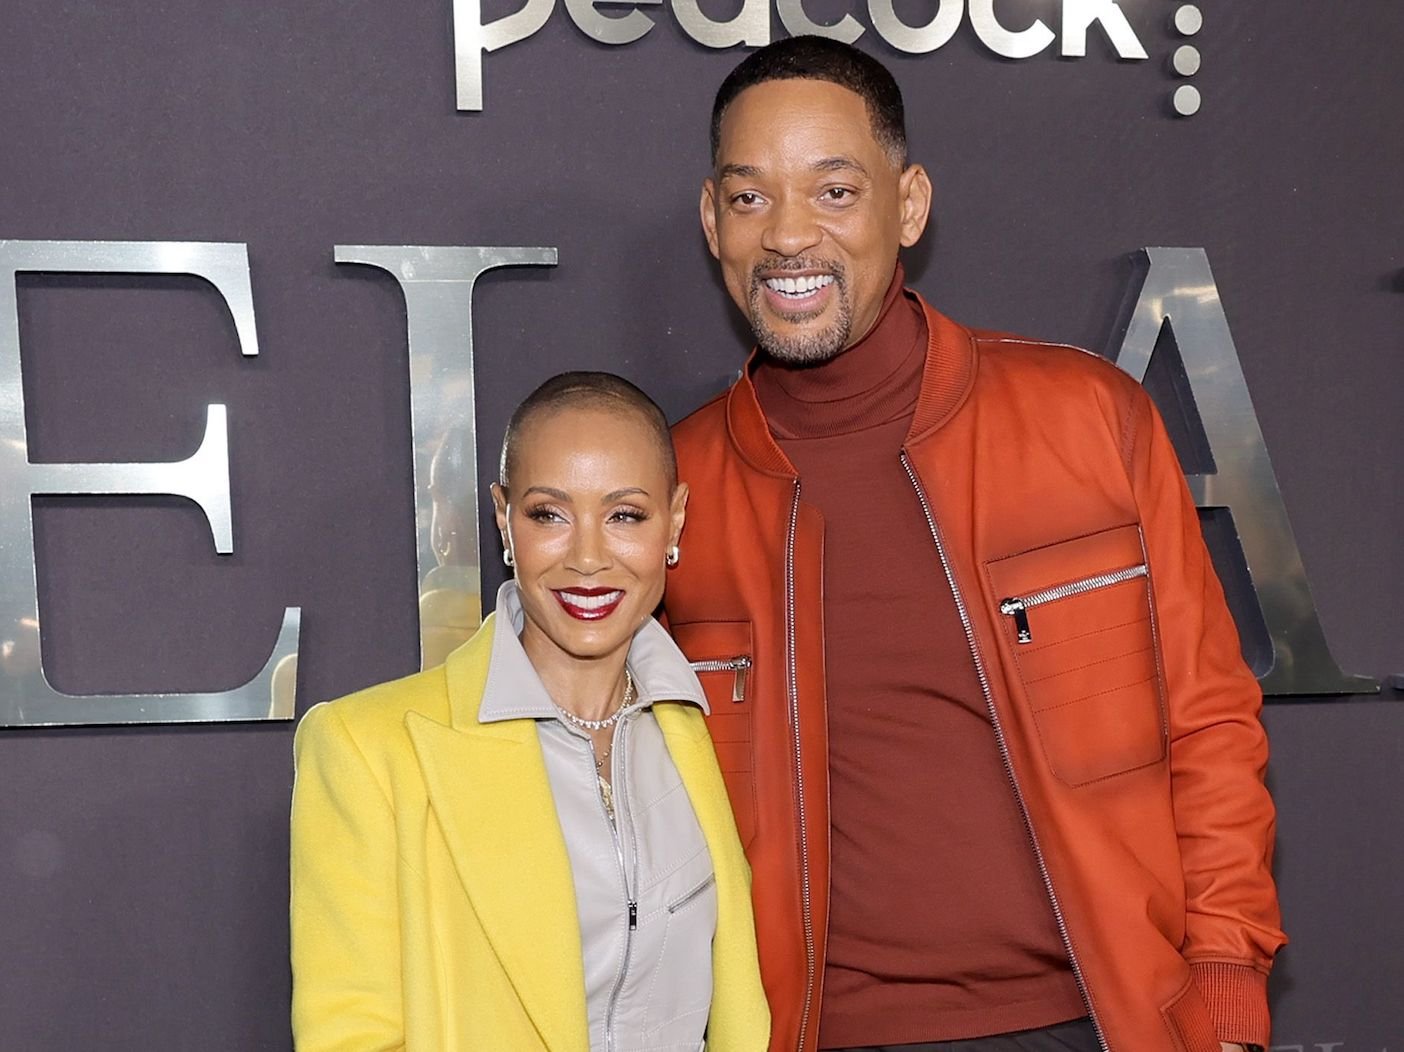 Tabloid Rumor Says Will Smith’s Apparently Burned Out Of Marriage To Jada Pinkett Over Costly Lifestyle